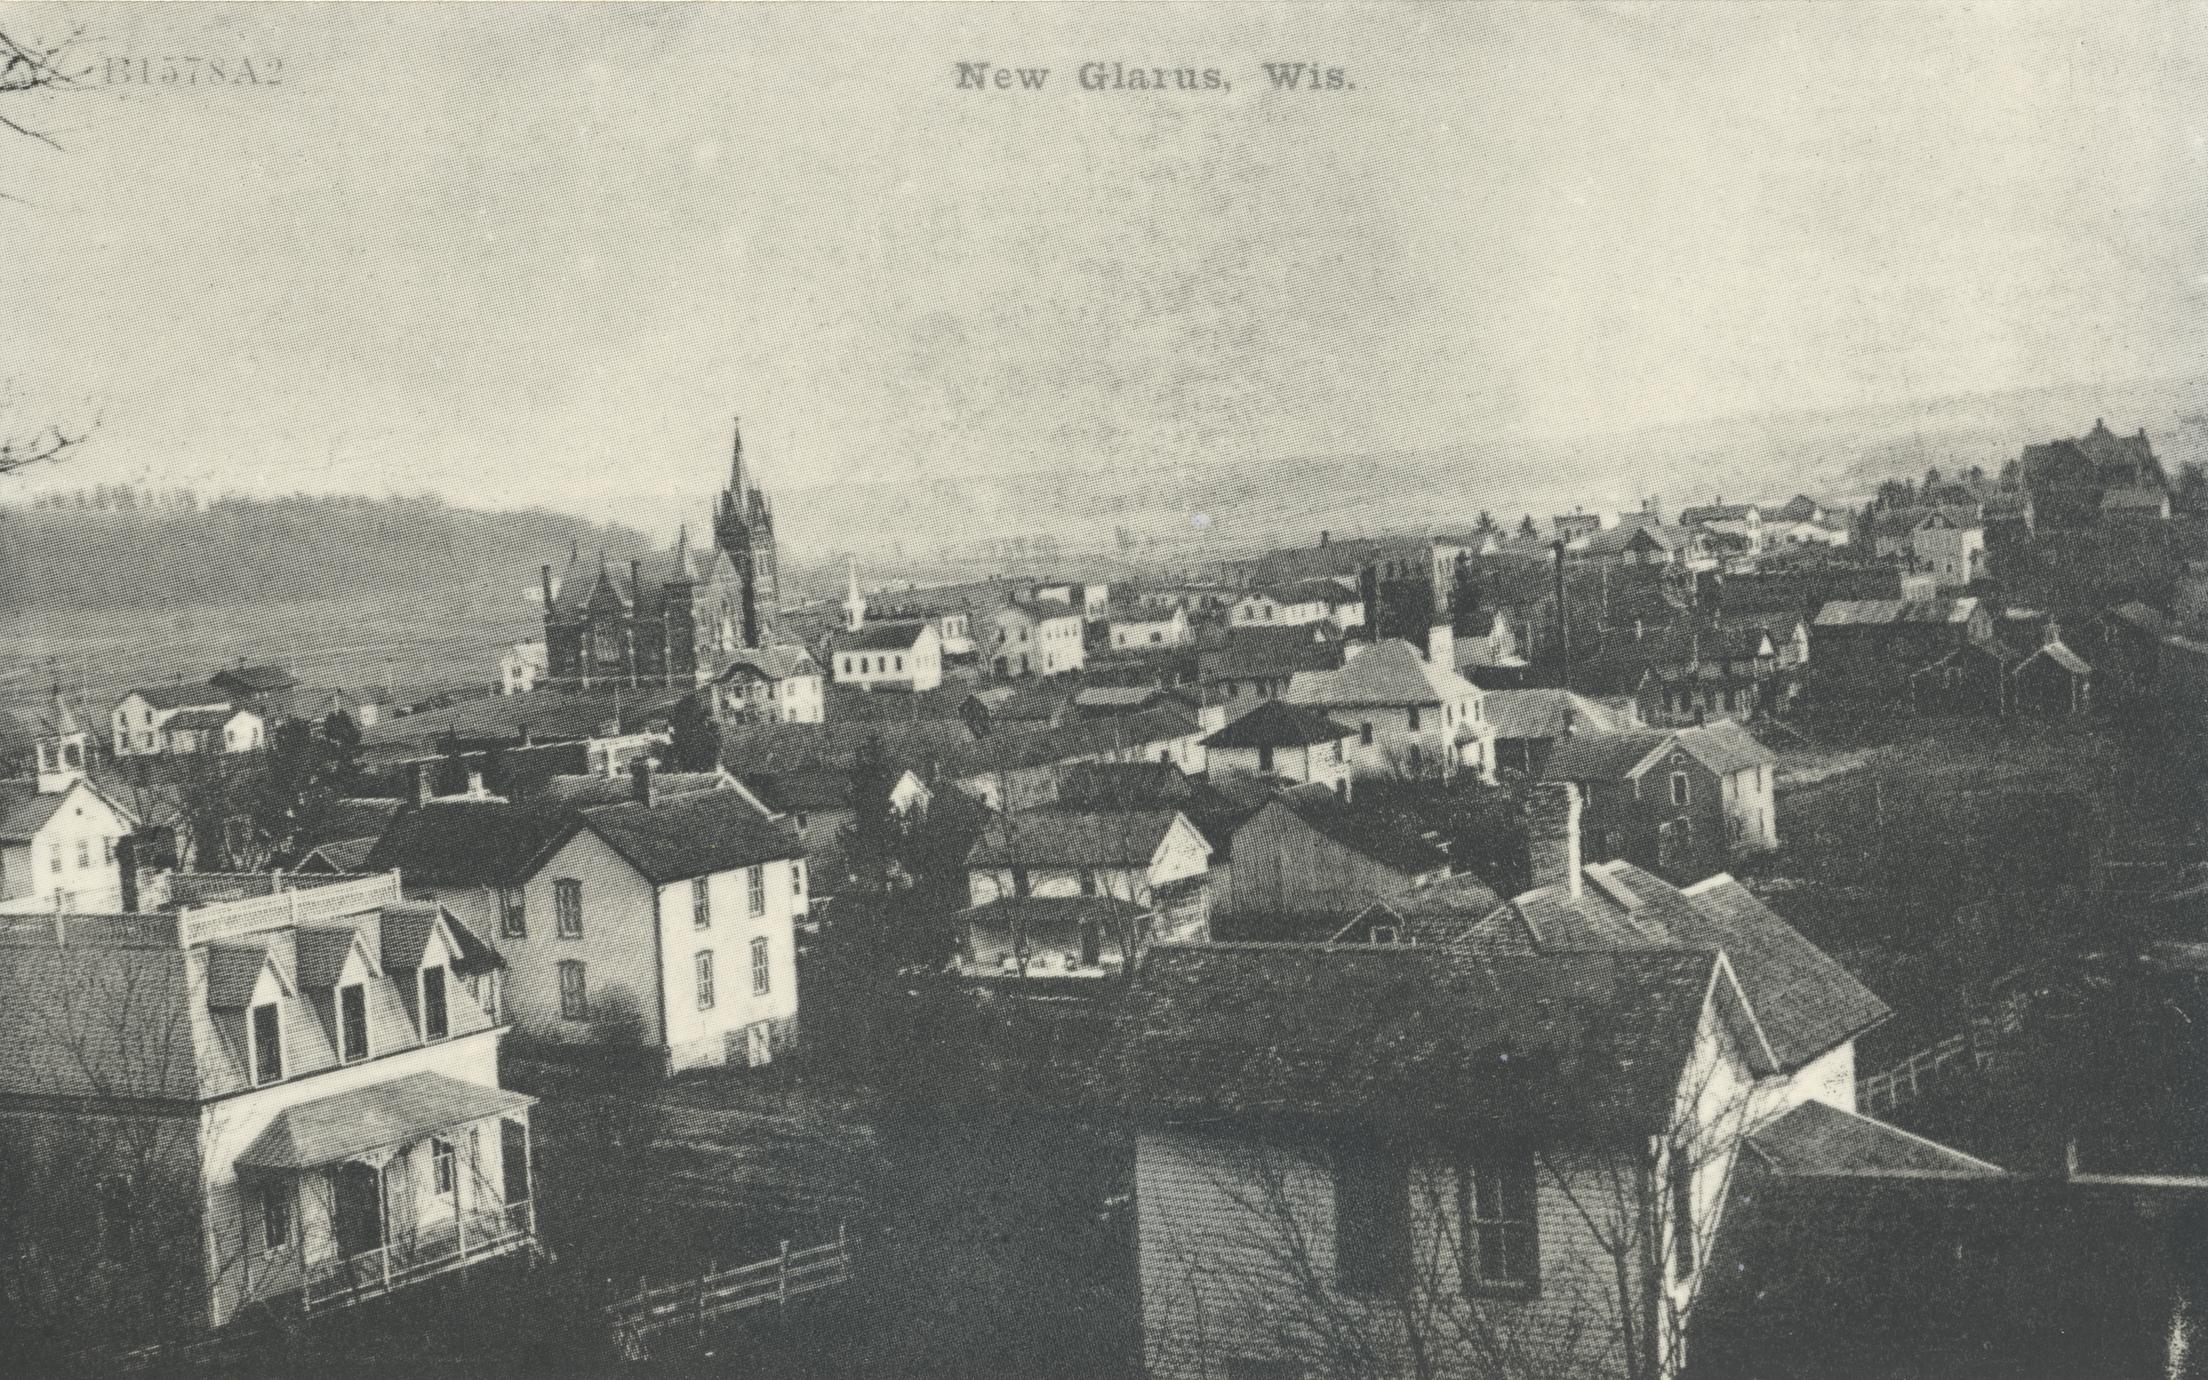 View of New Glarus, early 1900s